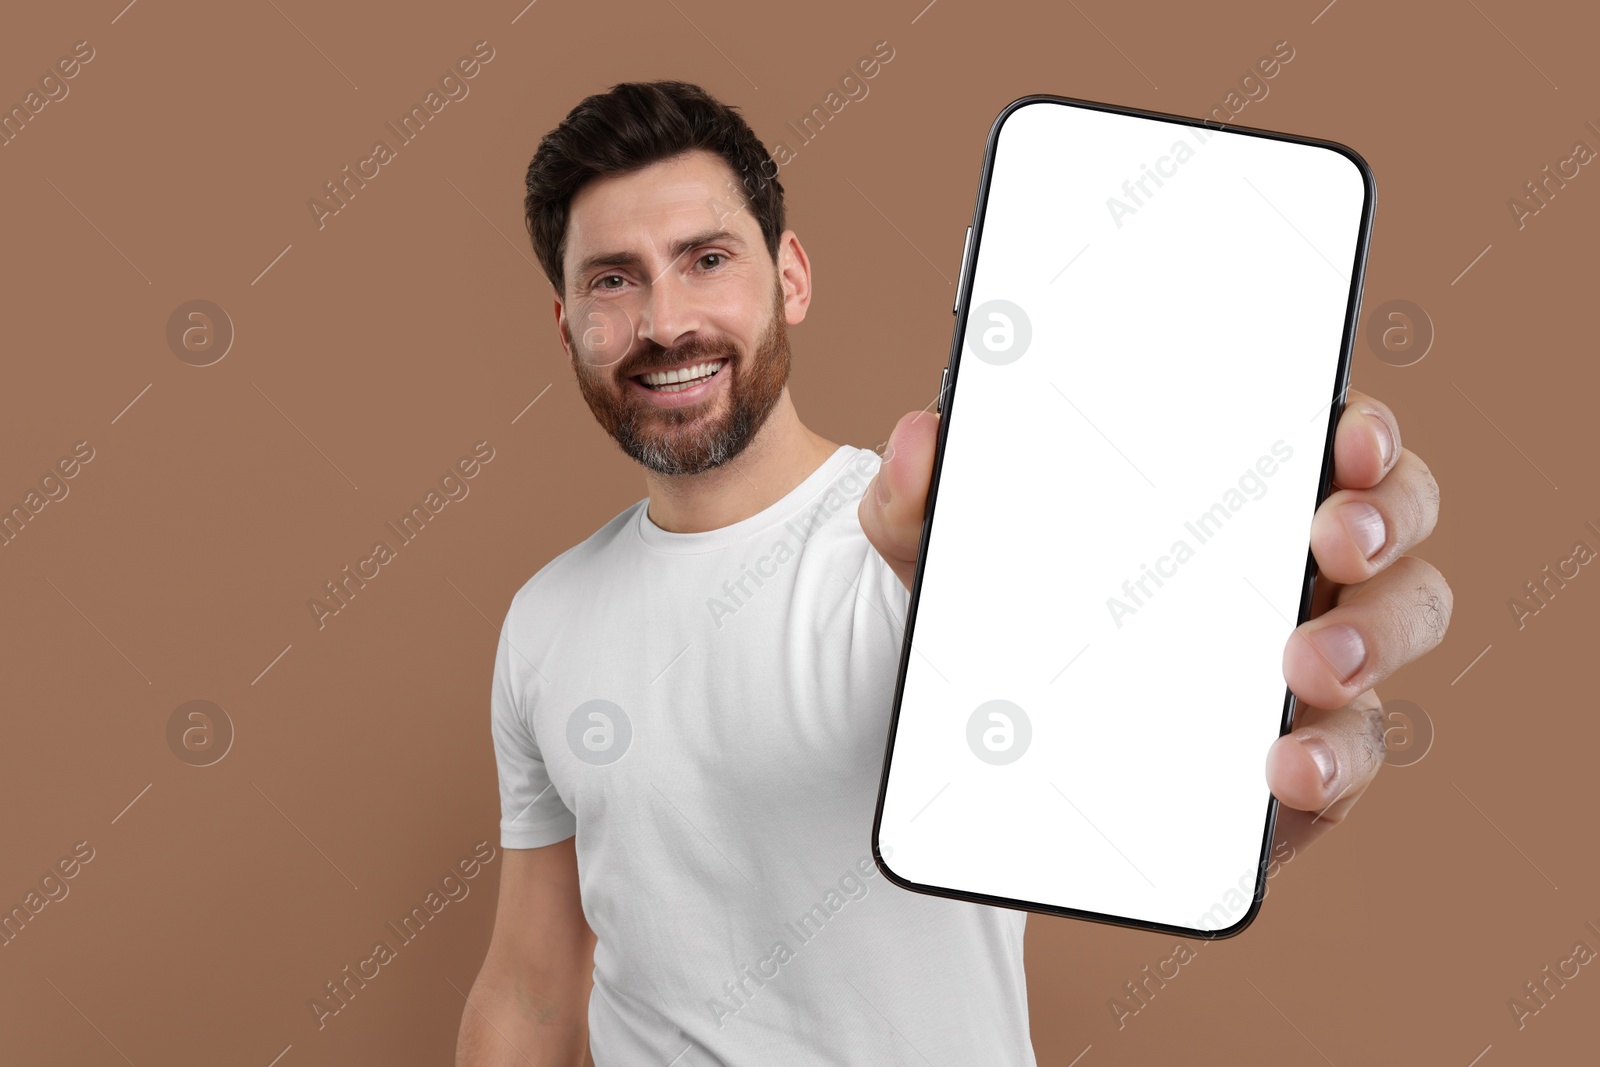 Image of Happy man holding smartphone with empty screen on brown background